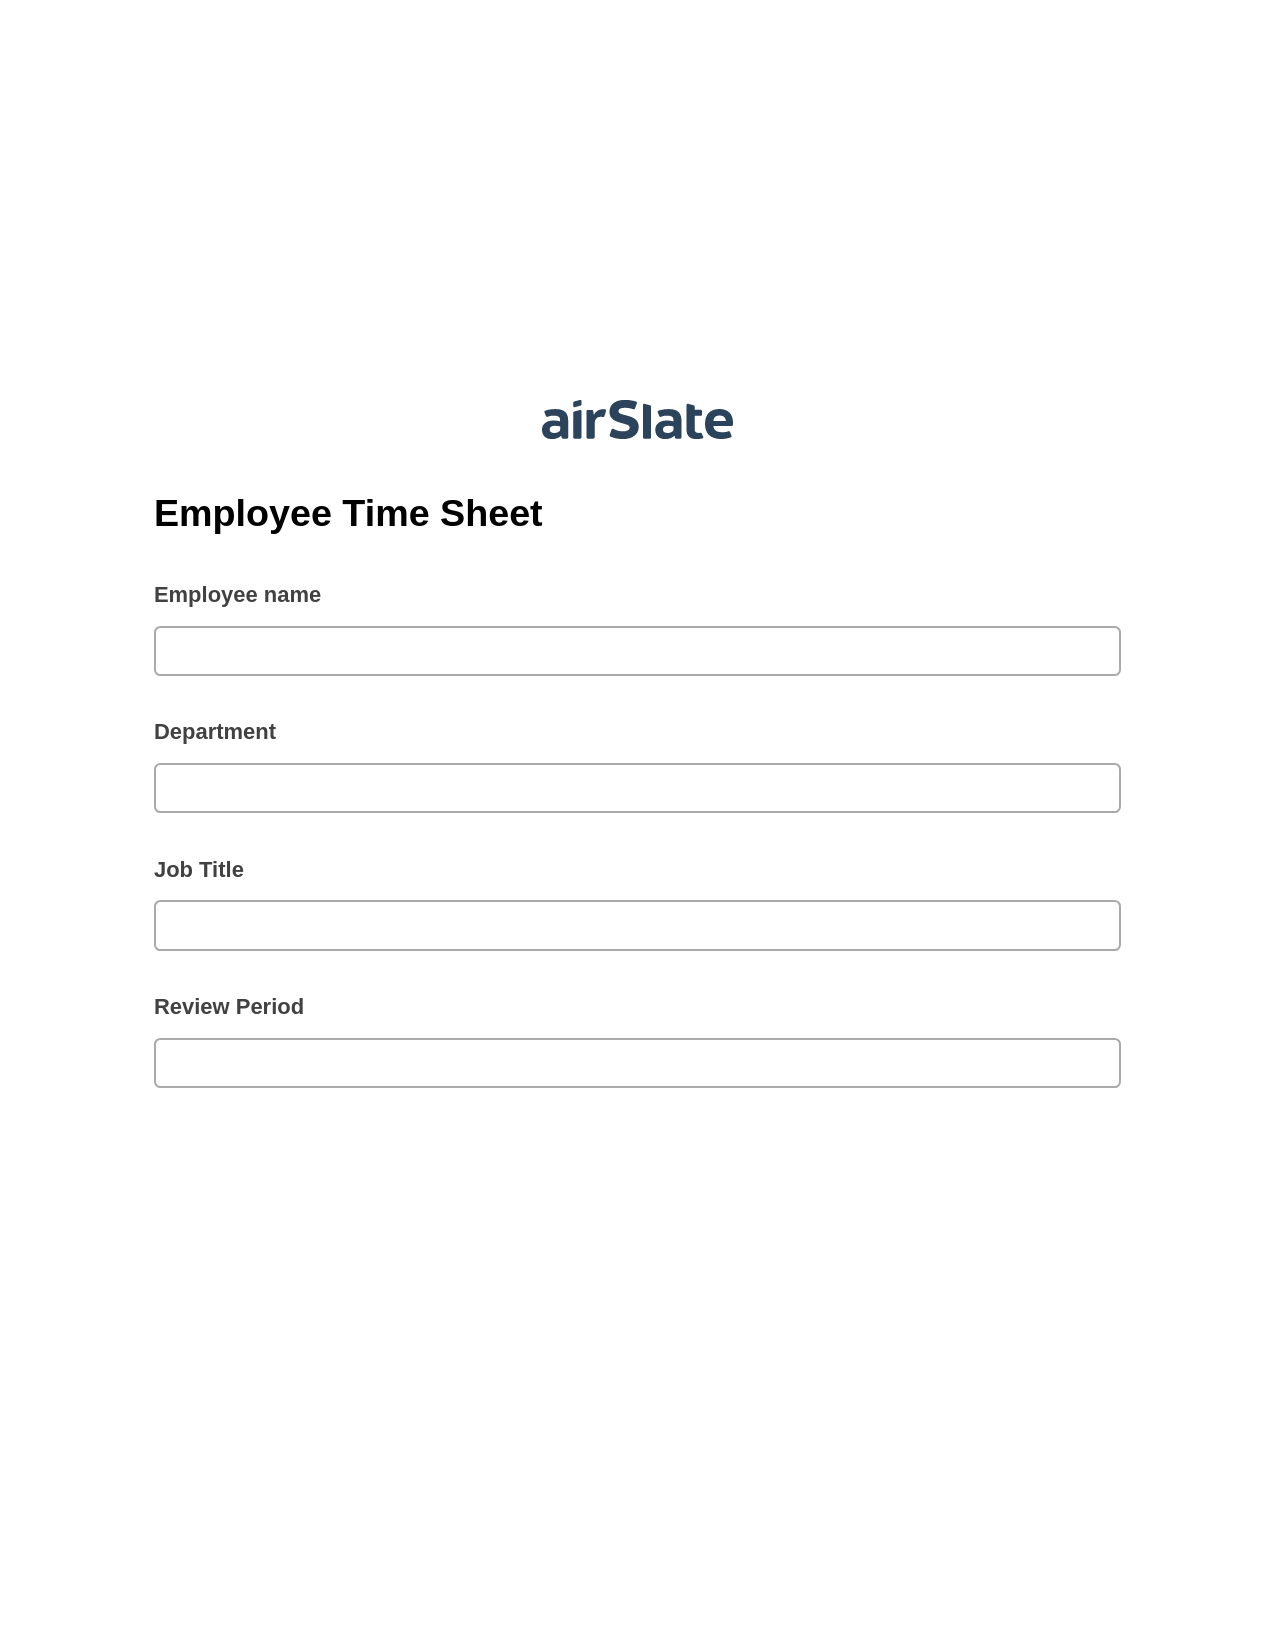 Employee Time Sheet Pre-fill from Google Sheets Bot, Update Audit Trail Bot, Export to WebMerge Bot